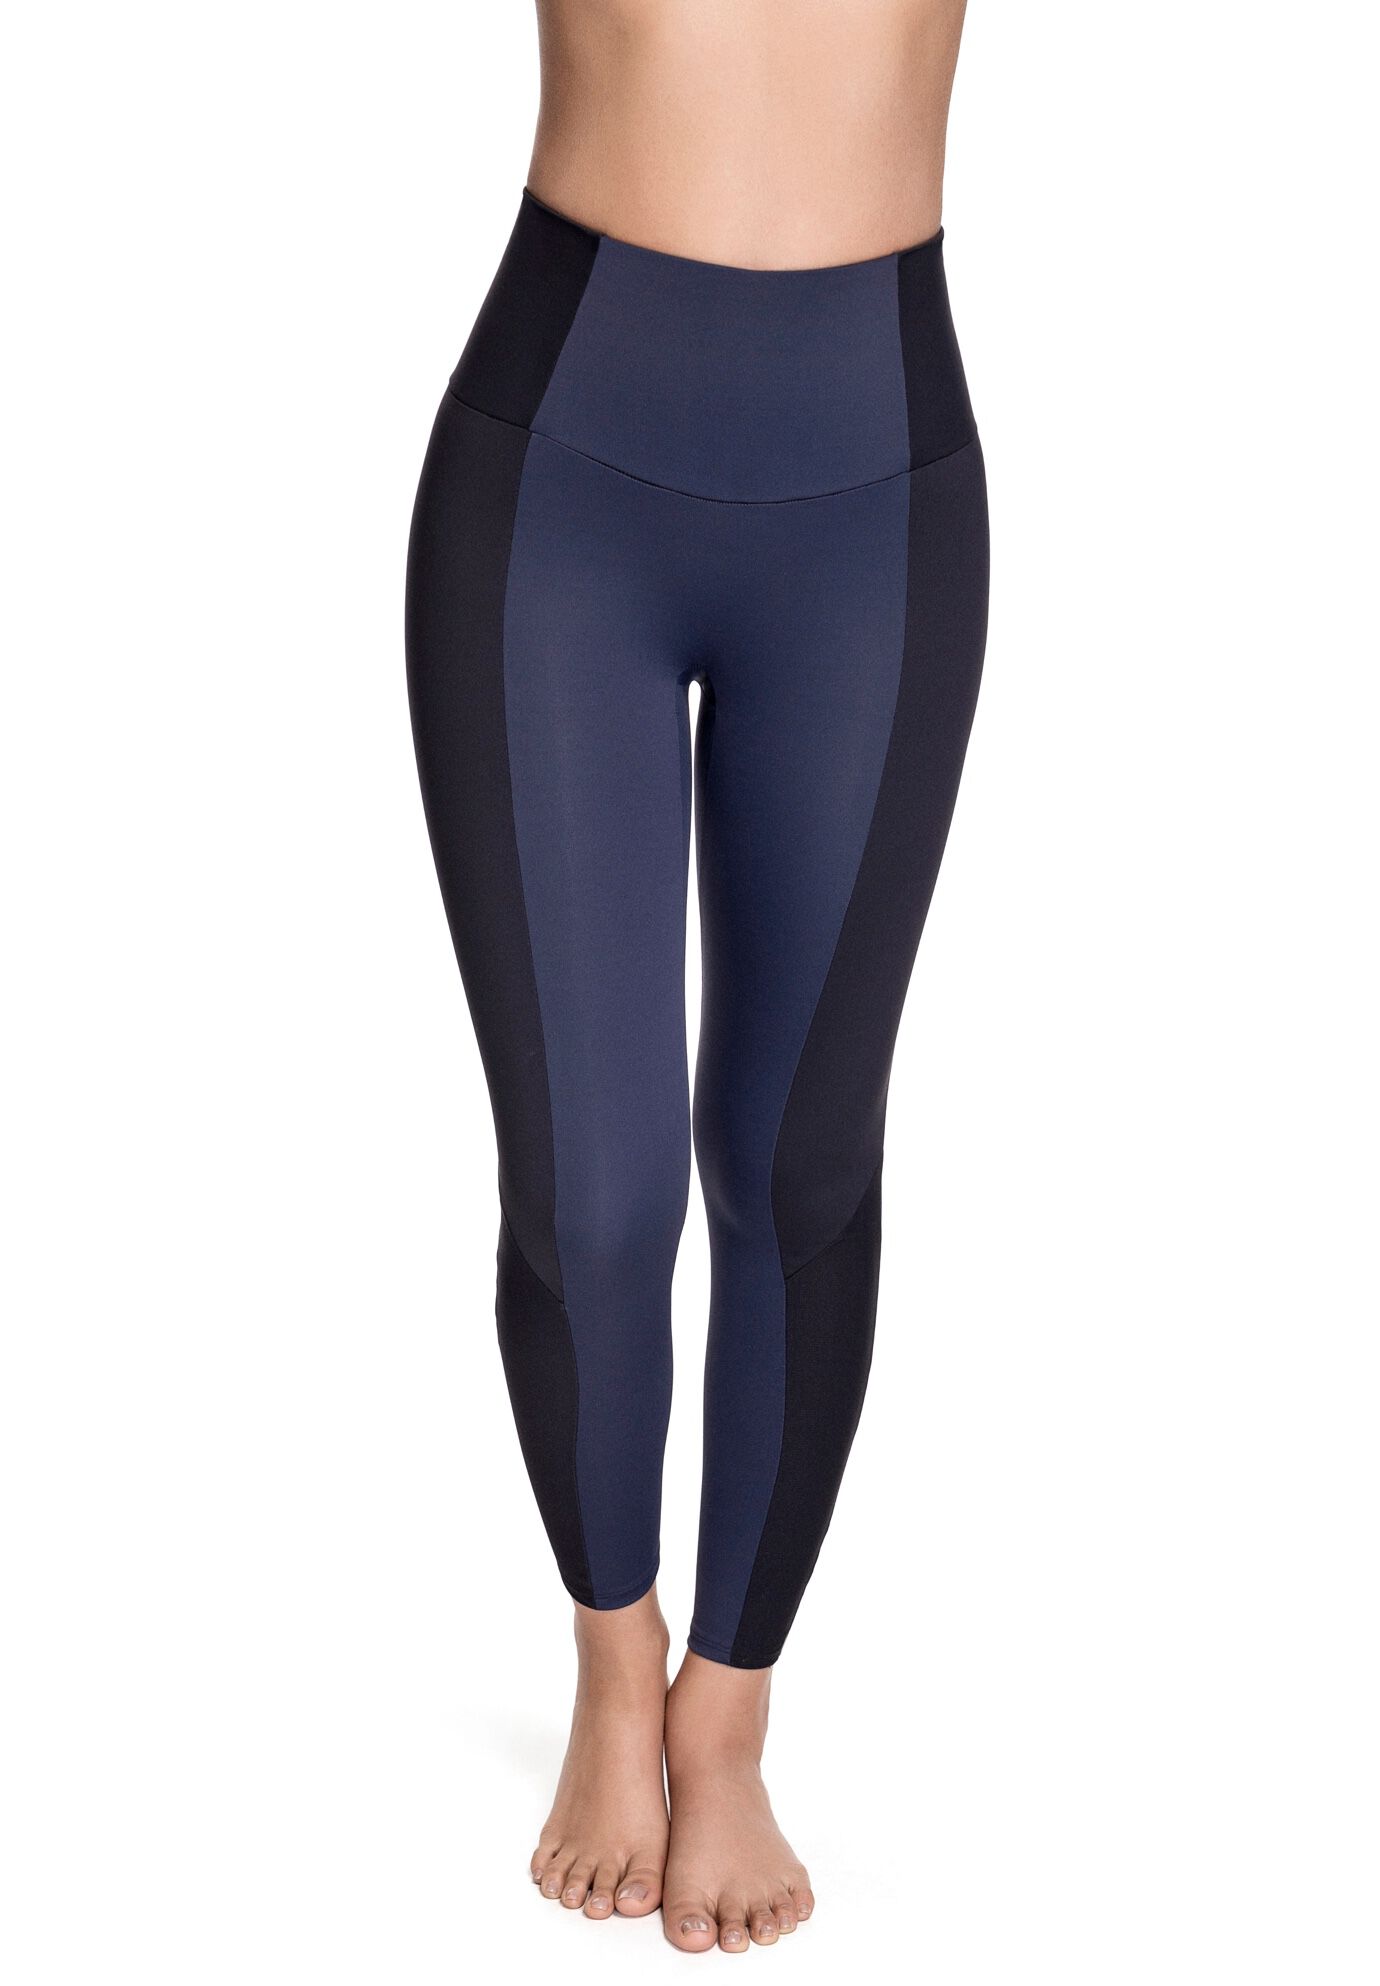 Plus Size Women's Rio Style Active Legging by Squeem in Midnight Blue Black (Size XS)